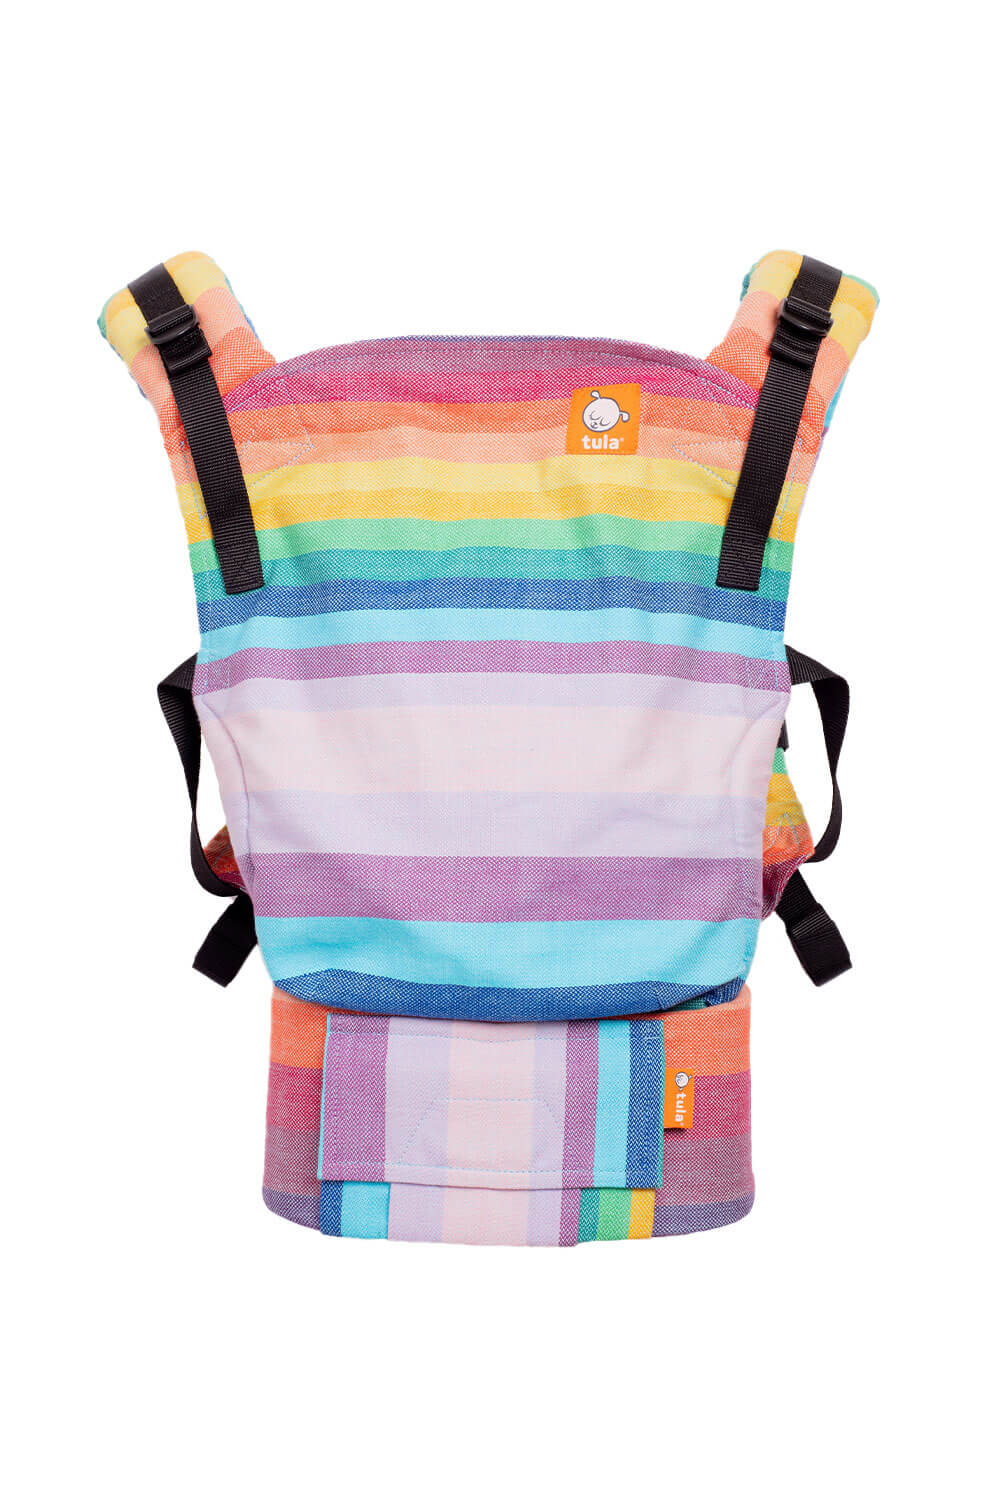 Rainbow Princess - Signature Handwoven Free-to-Grow Baby Carrier